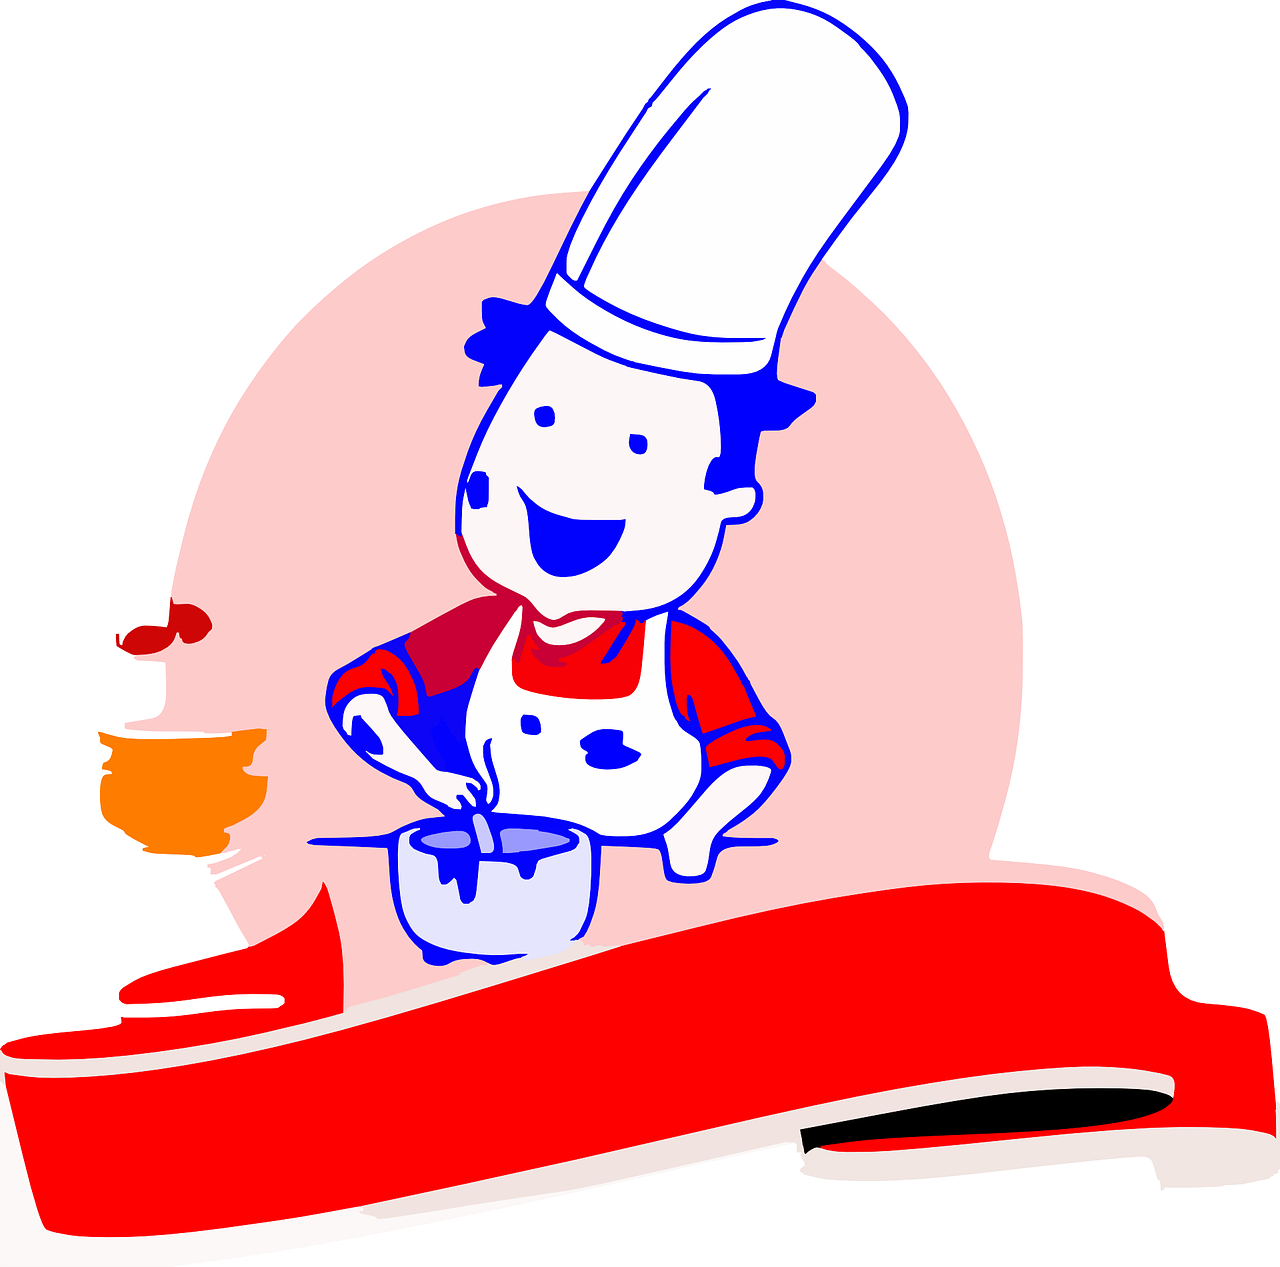 a cartoon chef standing in front of a red ribbon, an illustration of, conceptual art, bowl, red and blue color scheme, children illustration, cooking it up